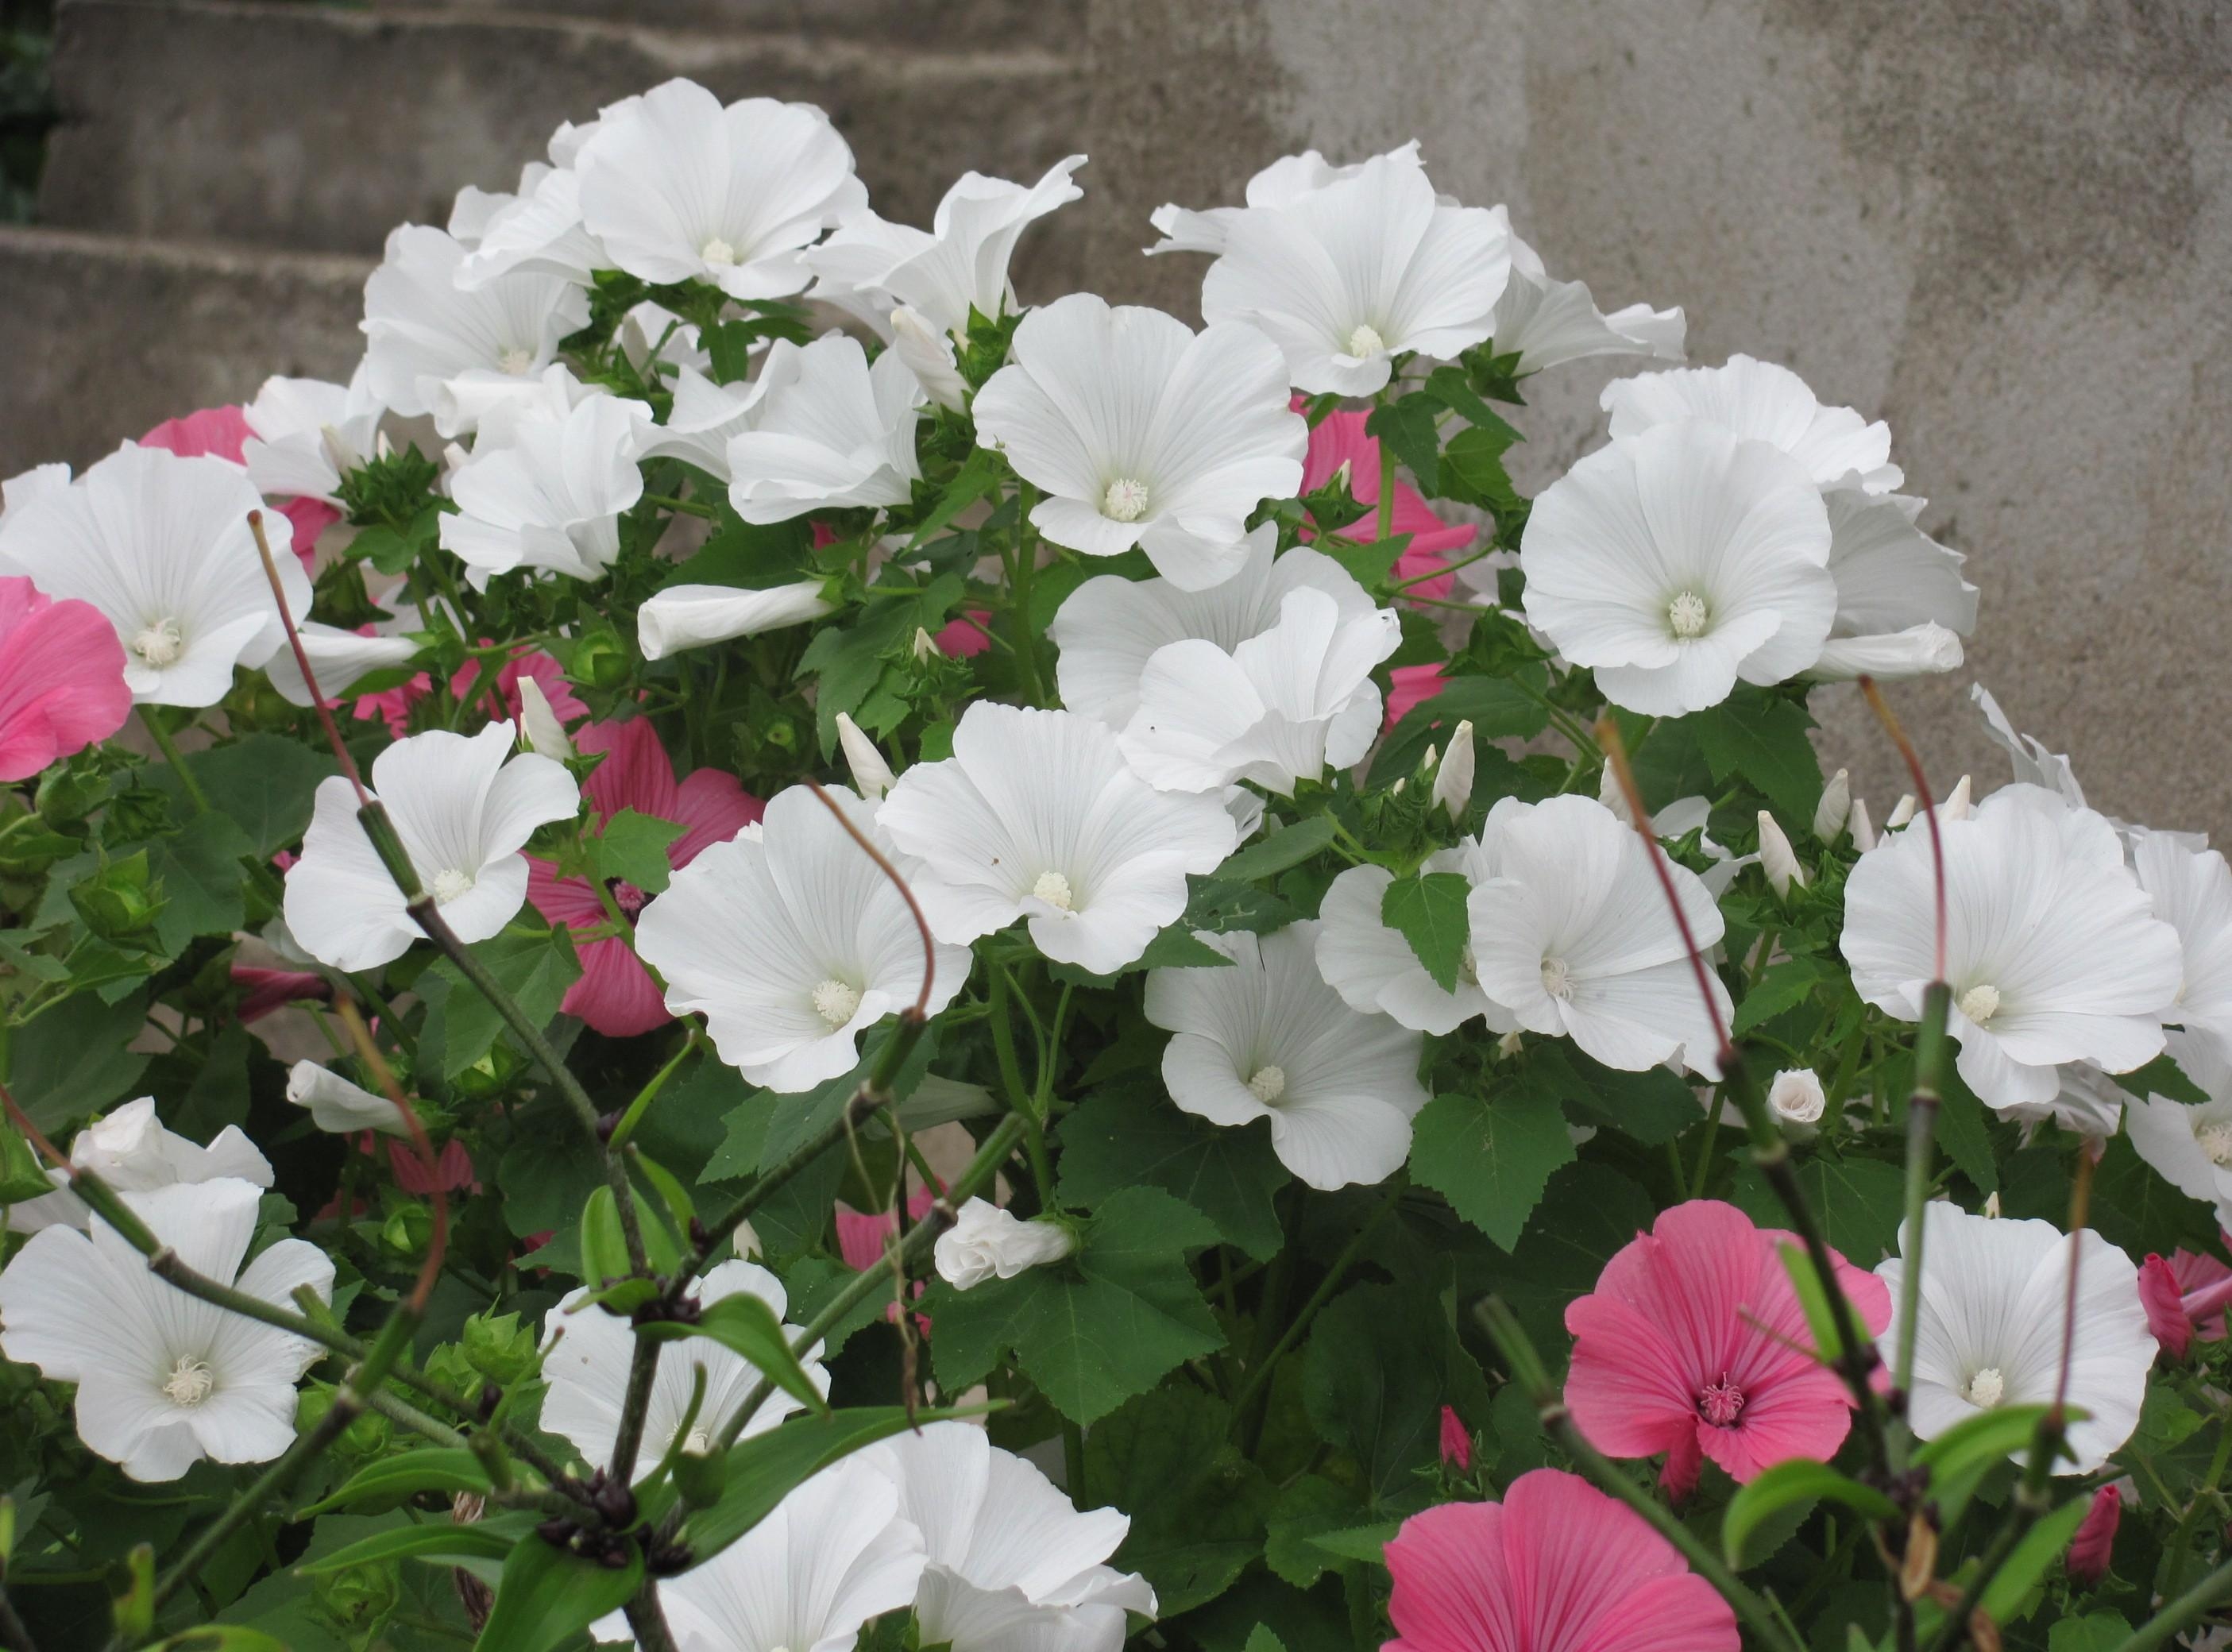 flowers, greens, flower bed, flowerbed, handsomely, it's beautiful, lavatera